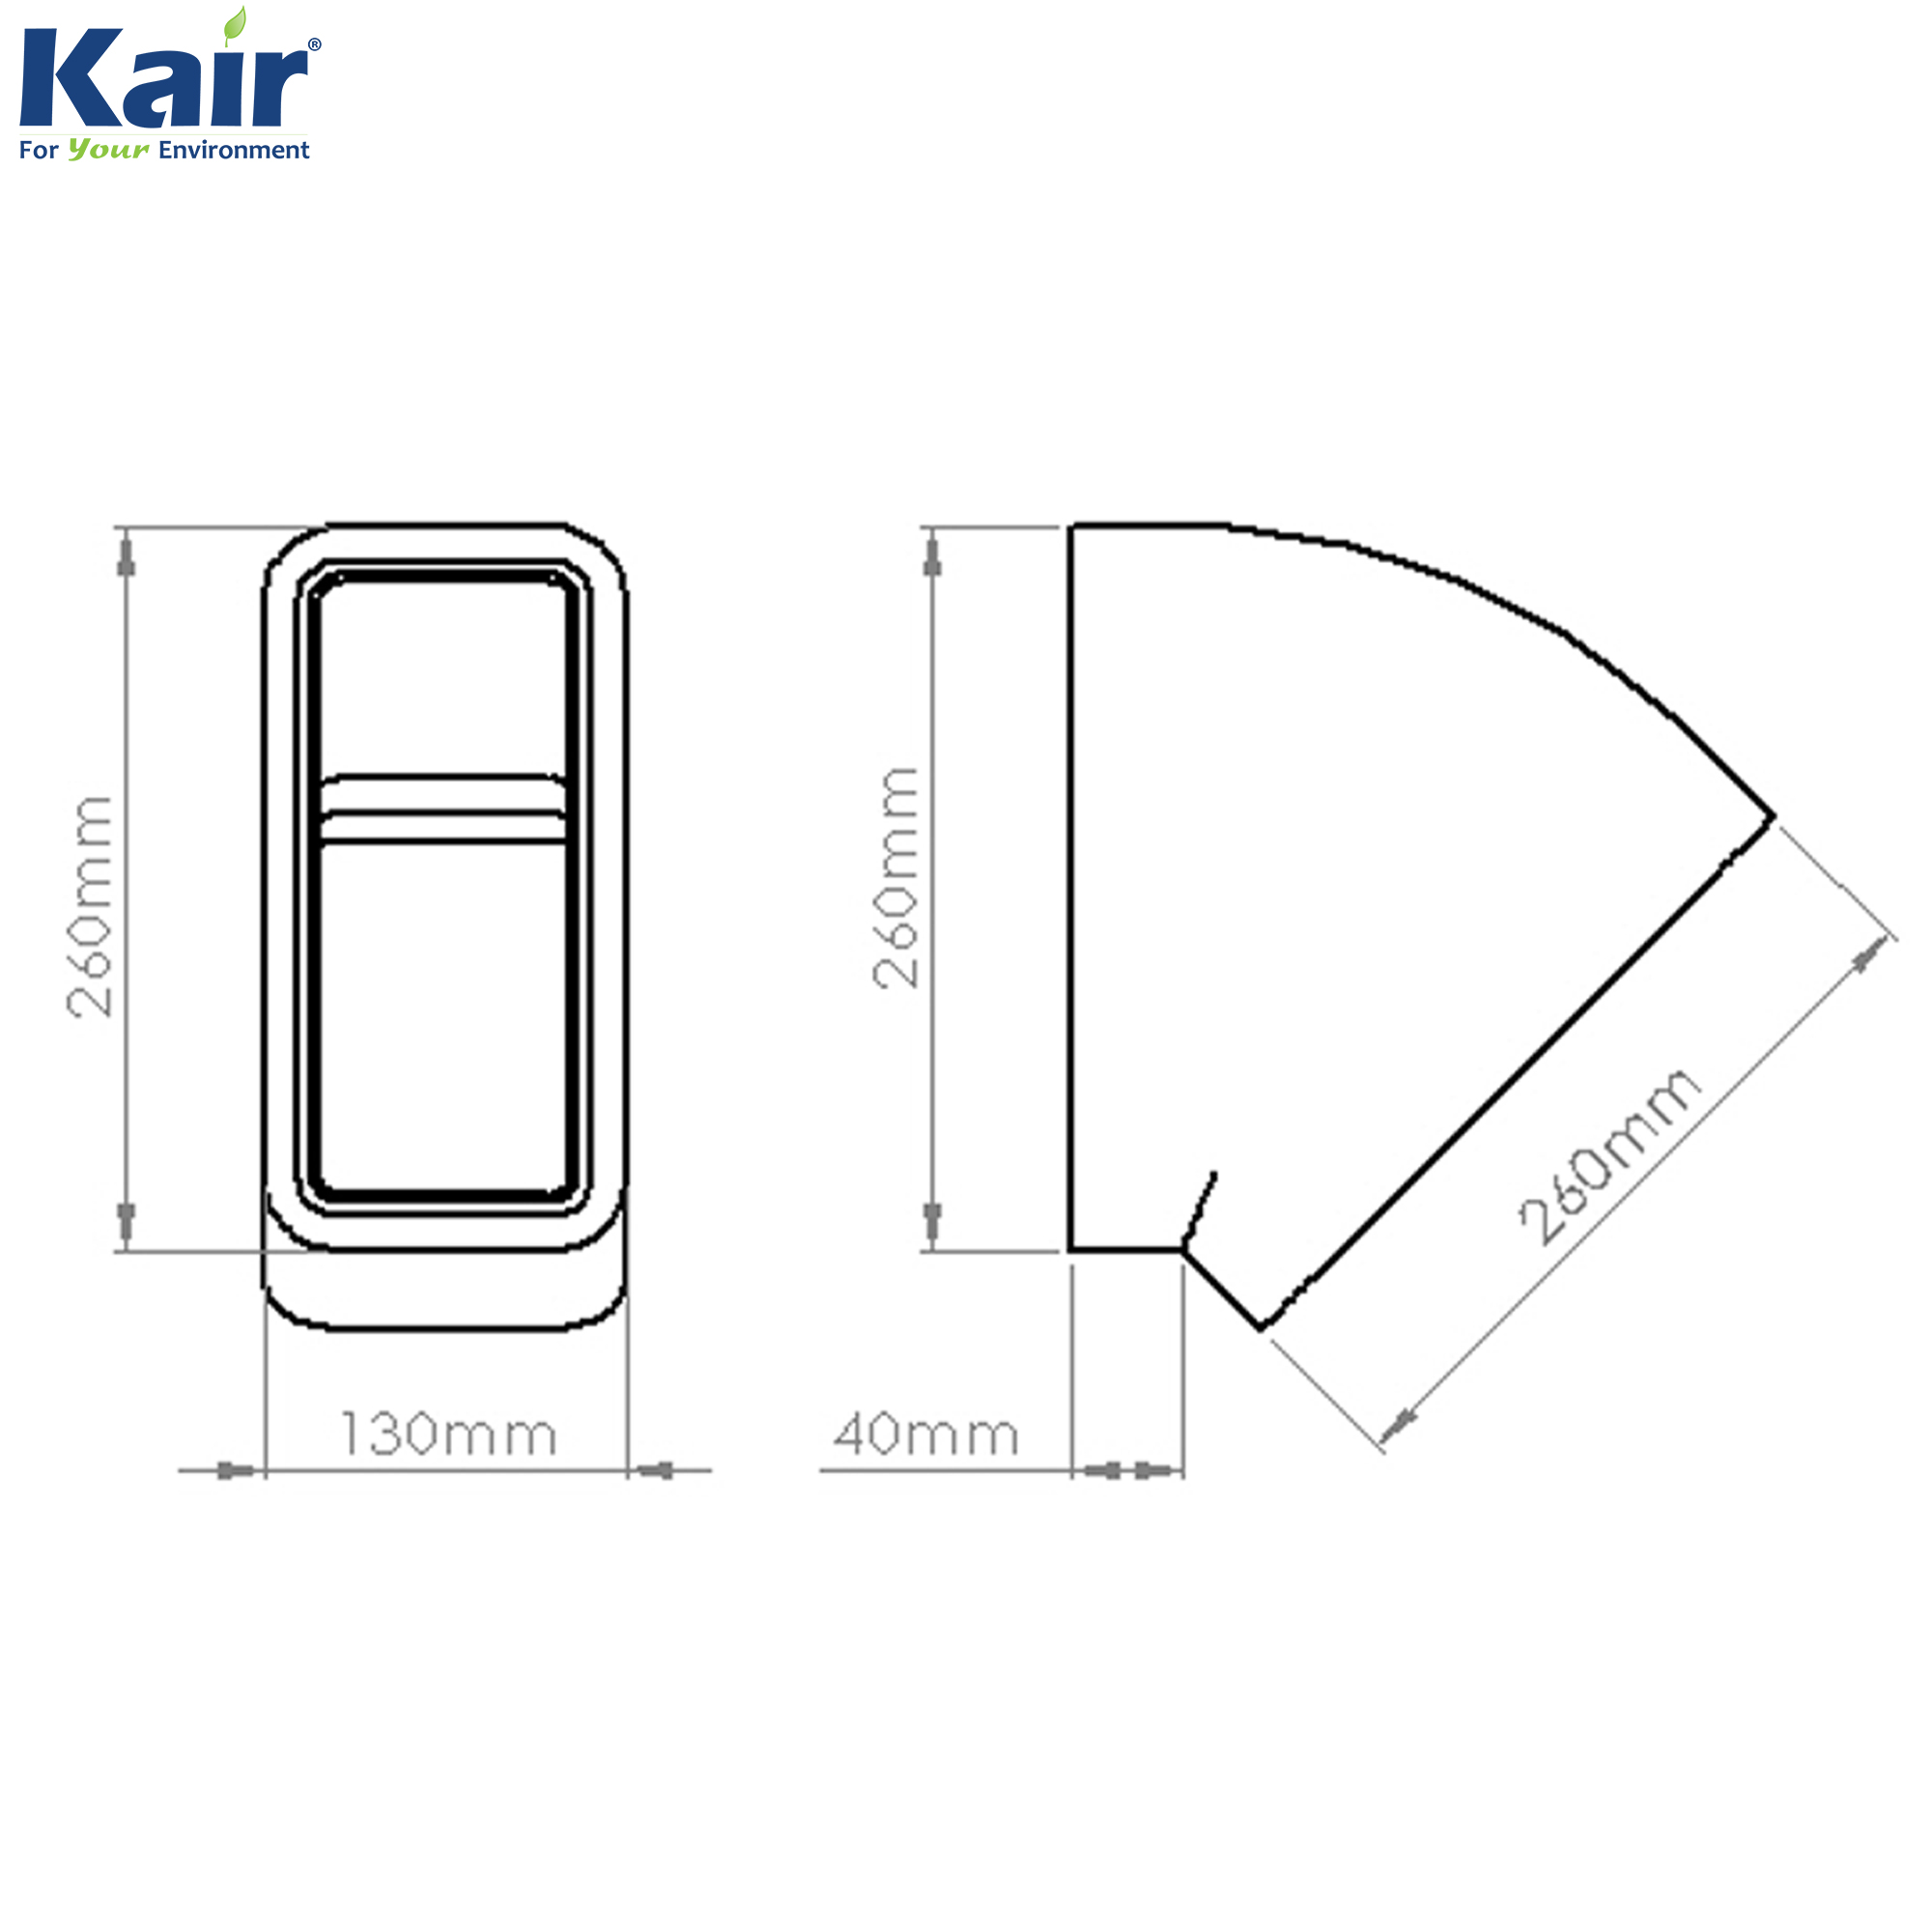 Box of 6 x Kair Self-Seal Thermal Ducting 220X90mm Horizontal 45 Degree Bend Complete With Female Click And Lock Fittings